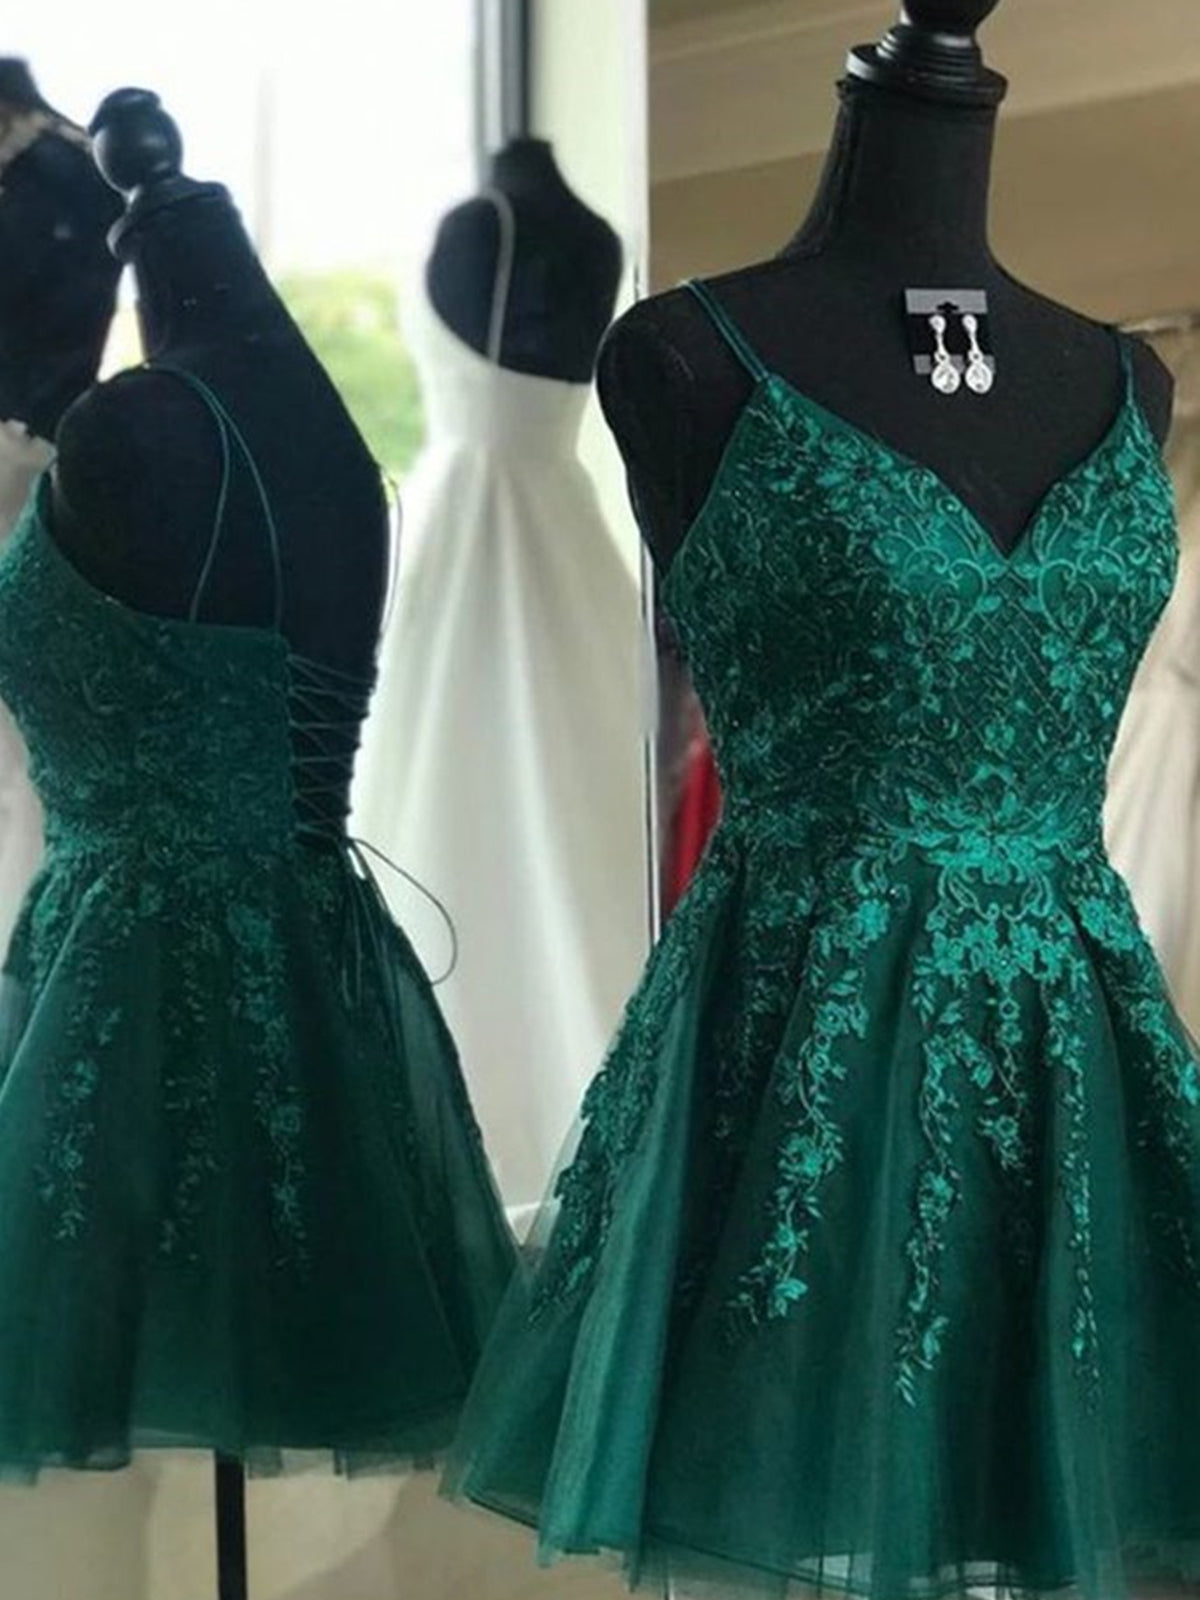 Formal Dresses Outfits, Short V Neck Green Lace Prom Dresses, Backless Short V Neck Green Lace Formal Homecoming Dresses